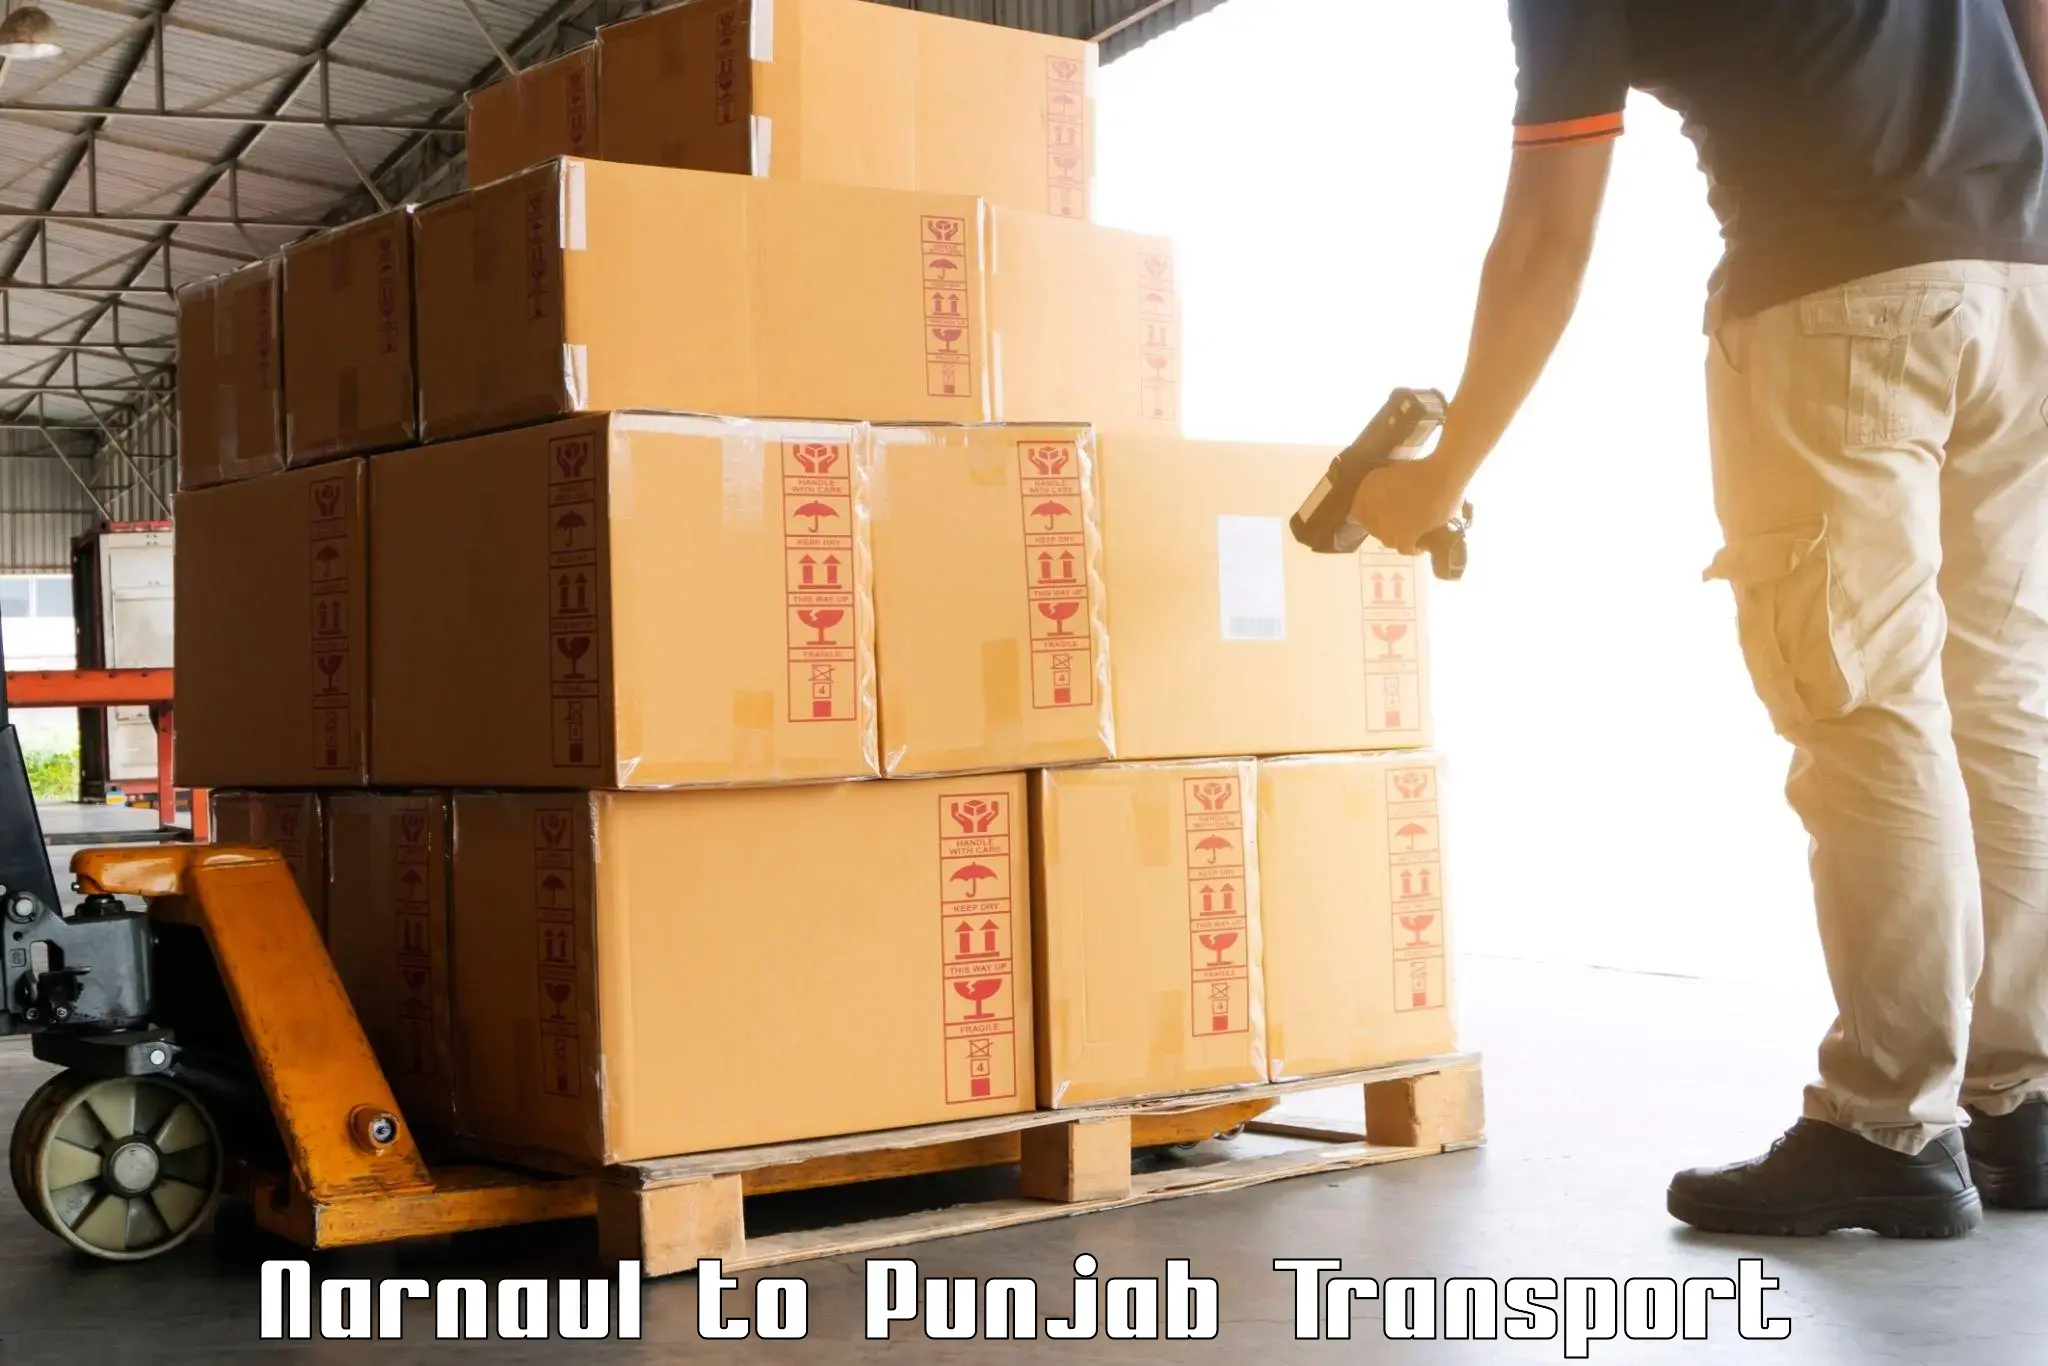 Daily transport service in Narnaul to Fatehgarh Sahib